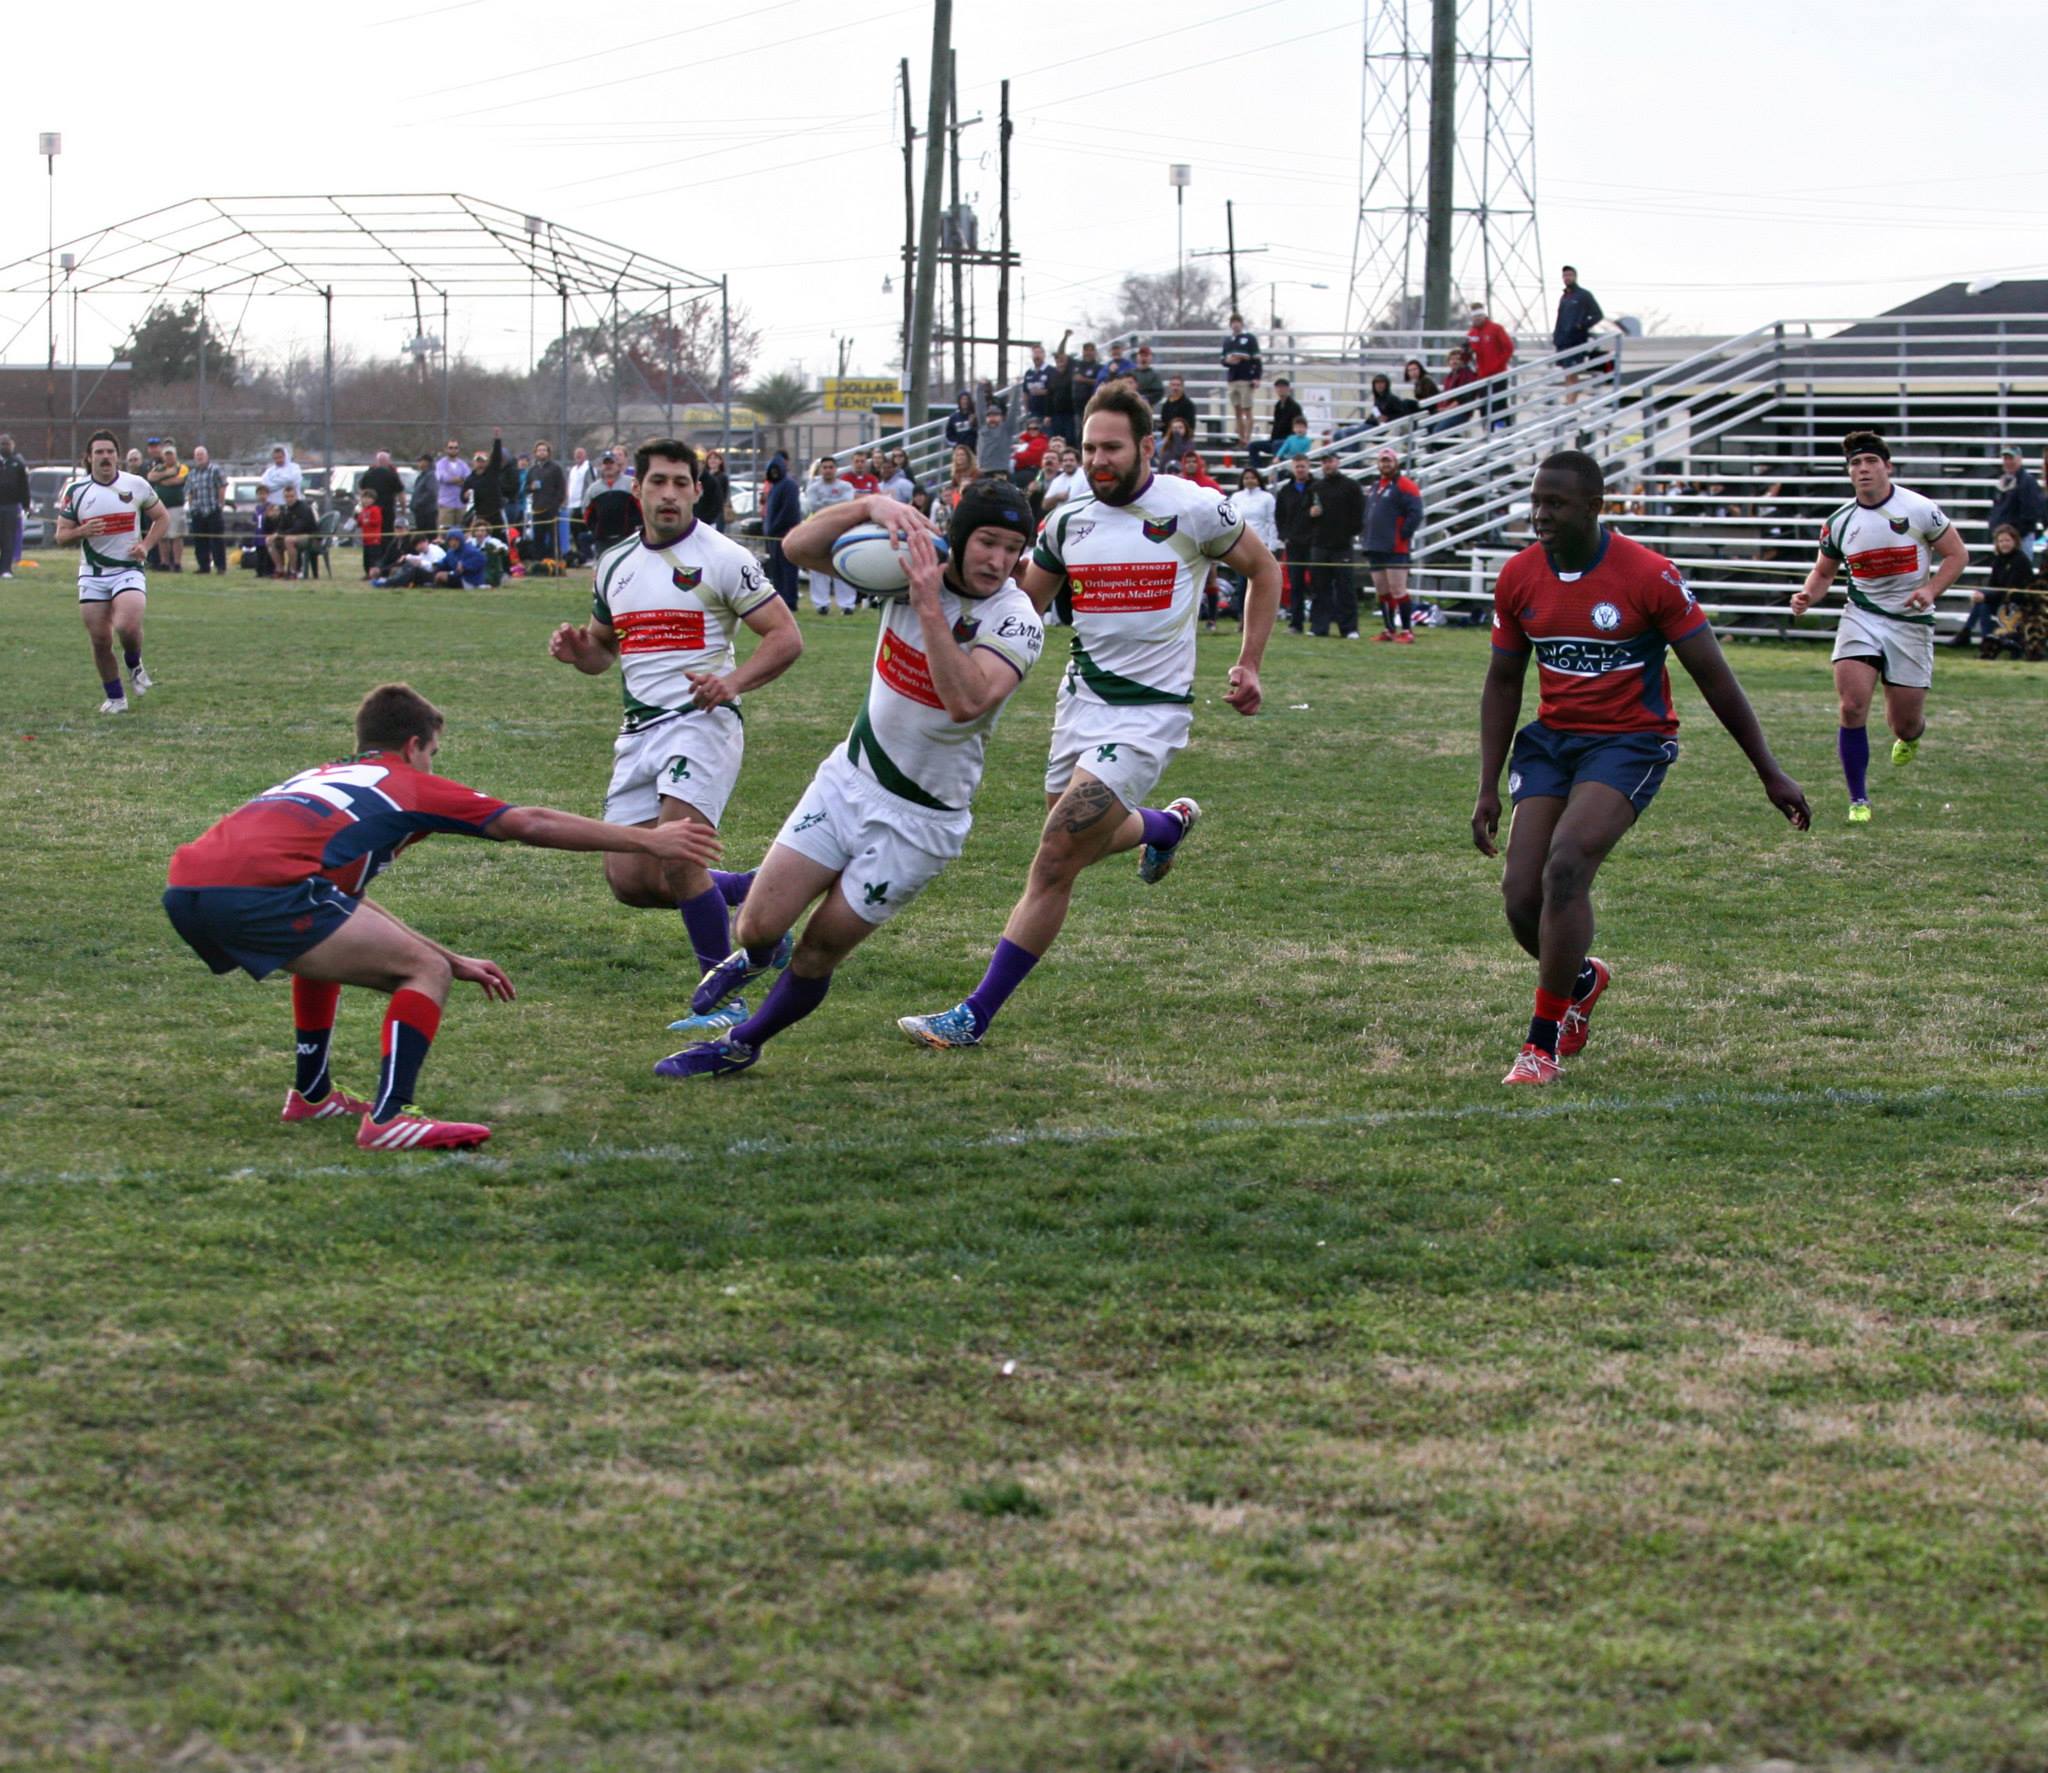 New Orleans Rugby vs. HARC; courtesy of New Orleans Rugby Football Club